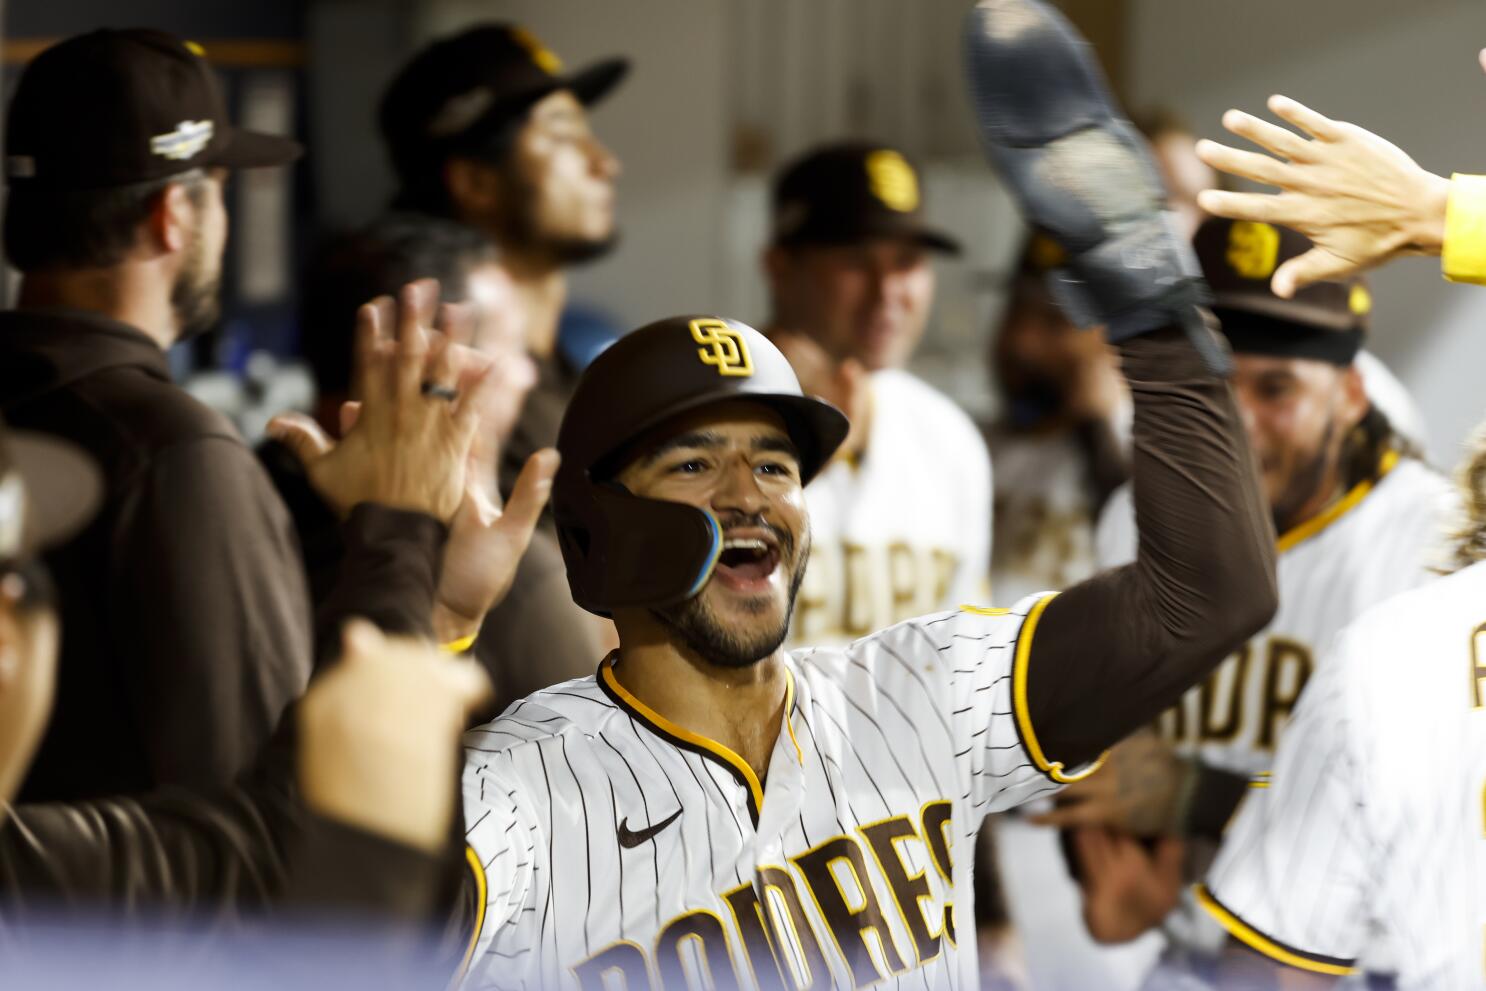 MLB Trade Rumors on X: #Padres option their Opening Day catcher